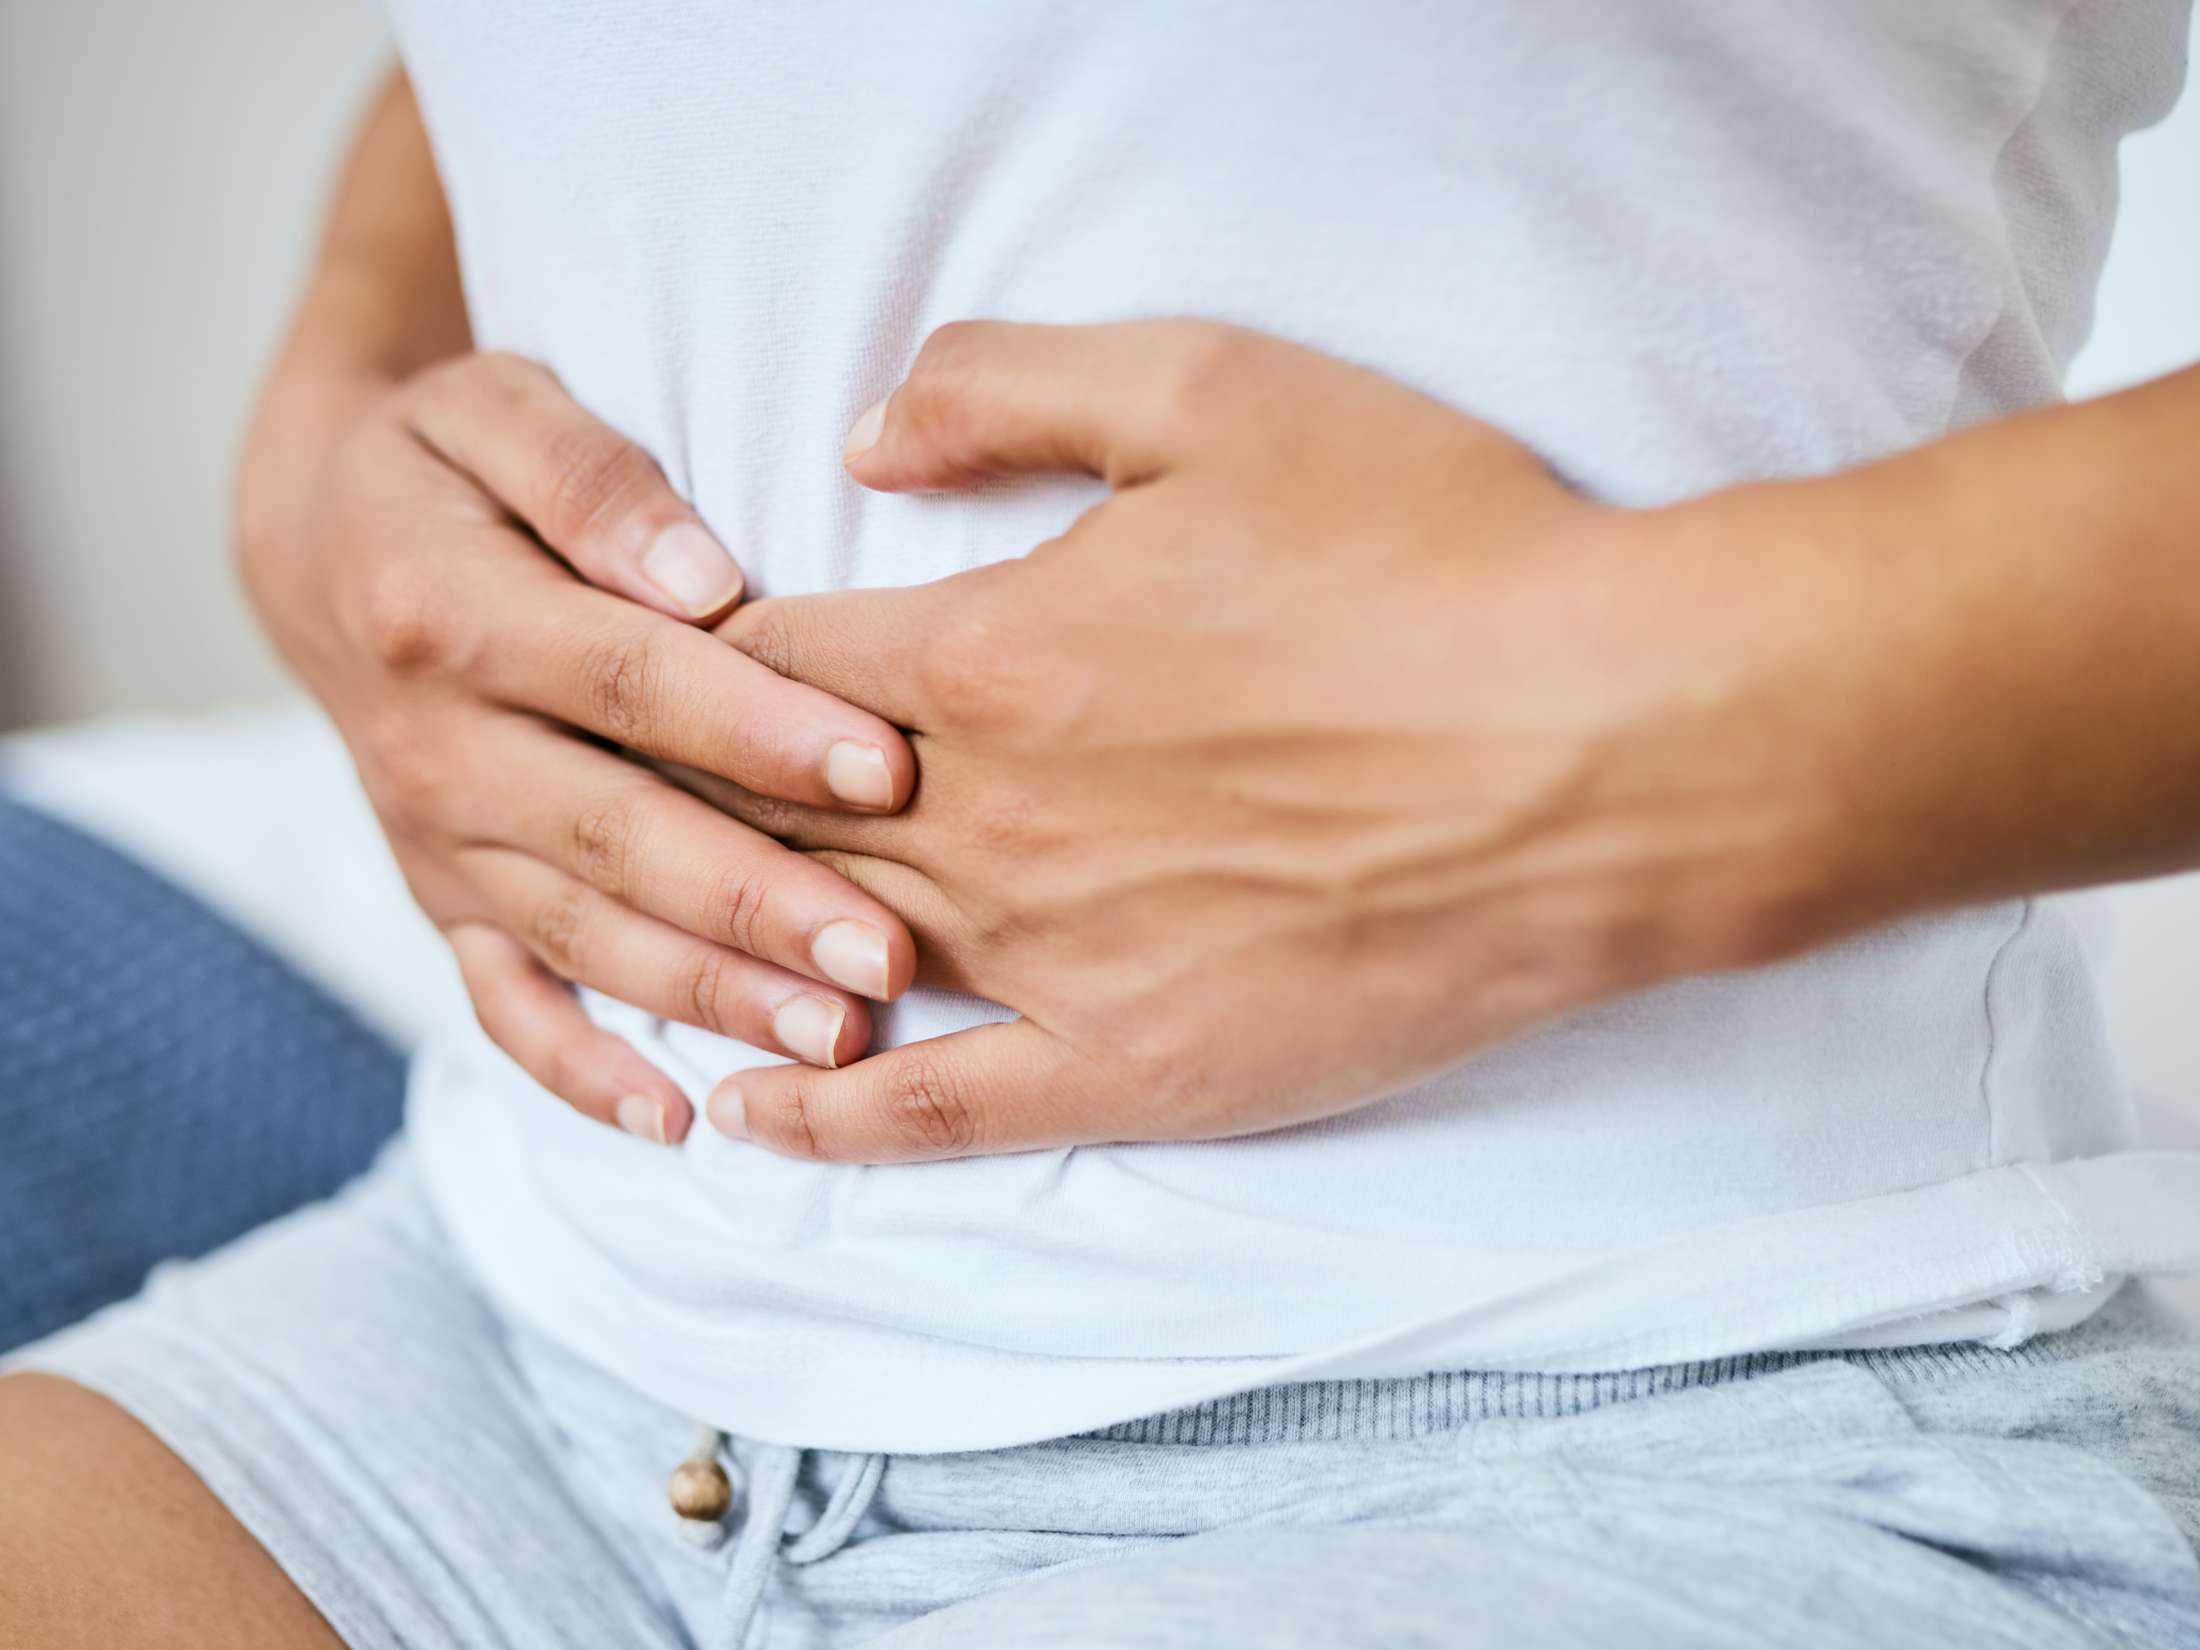 Anal fissure: Causes, symptoms, and treatments